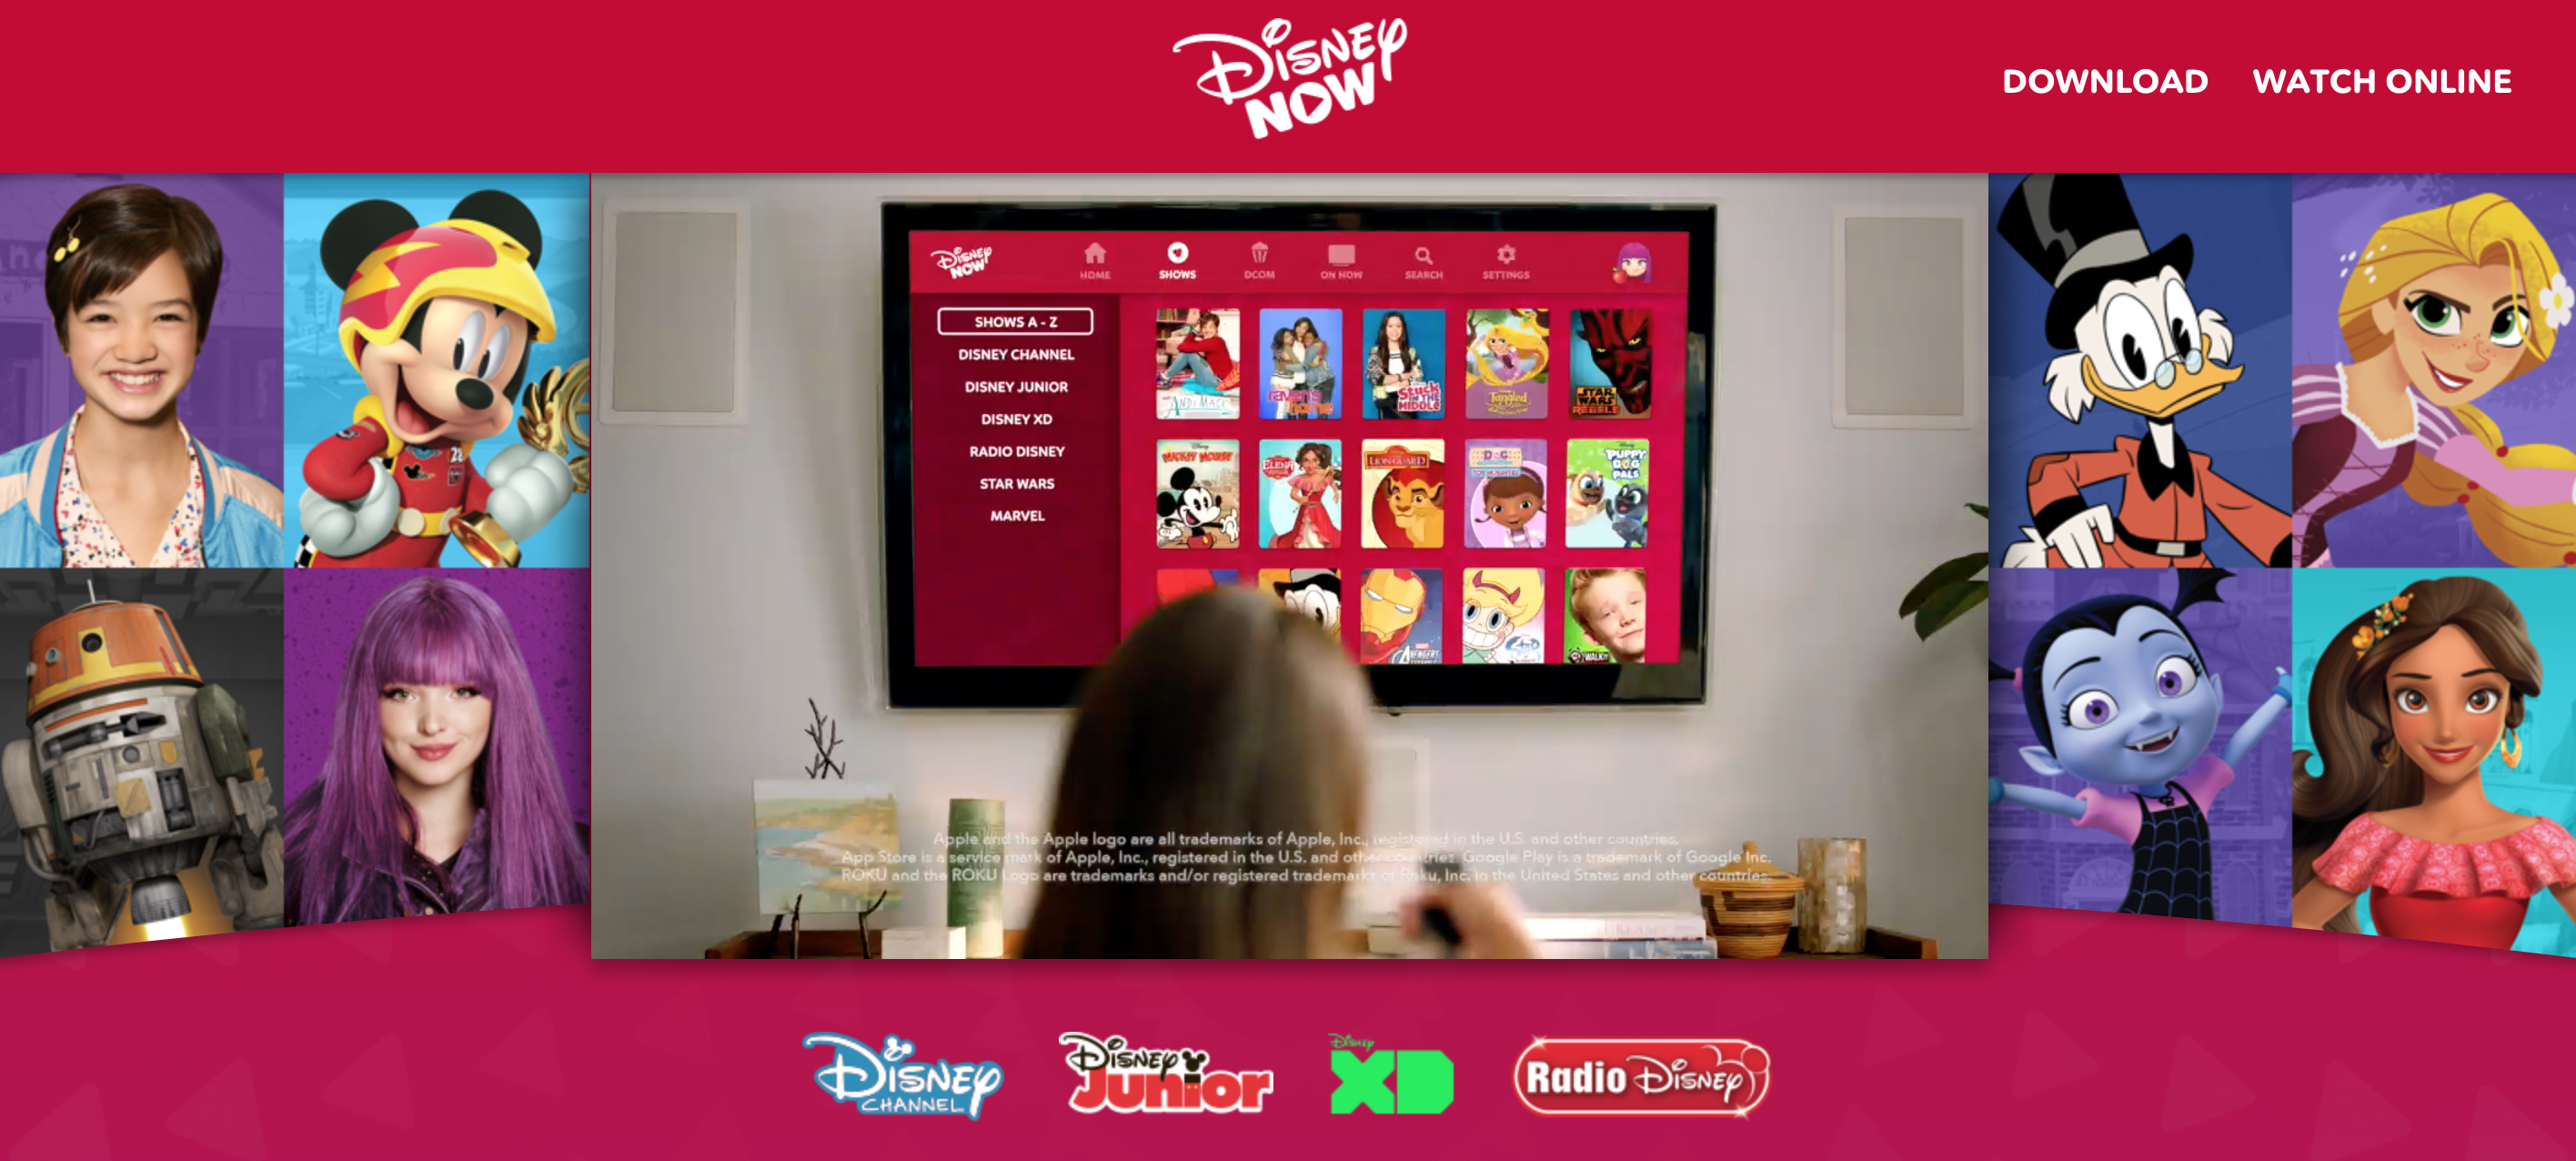 Disney releases DisneyNow, a new app that combines live TV, on-demand,  games and music | TechCrunch